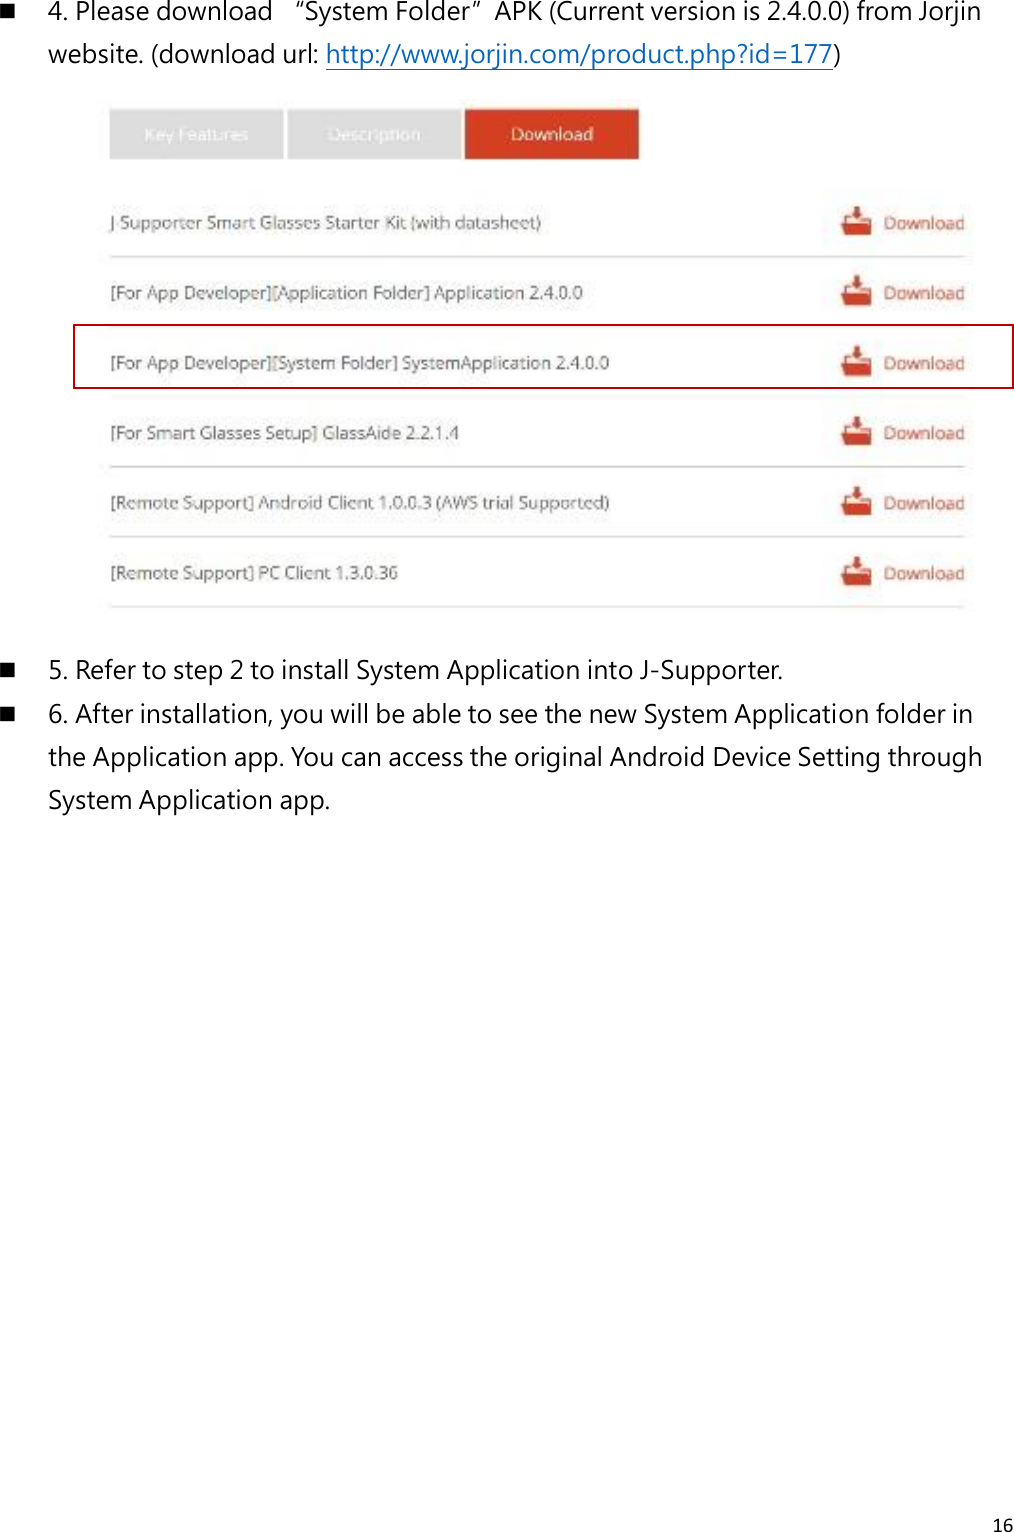 16   4. Please download “System Folder”APK (Current version is 2.4.0.0) from Jorjin website. (download url: http://www.jorjin.com/product.php?id=177)   5. Refer to step 2 to install System Application into J-Supporter.  6. After installation, you will be able to see the new System Application folder in the Application app. You can access the original Android Device Setting through System Application app.     